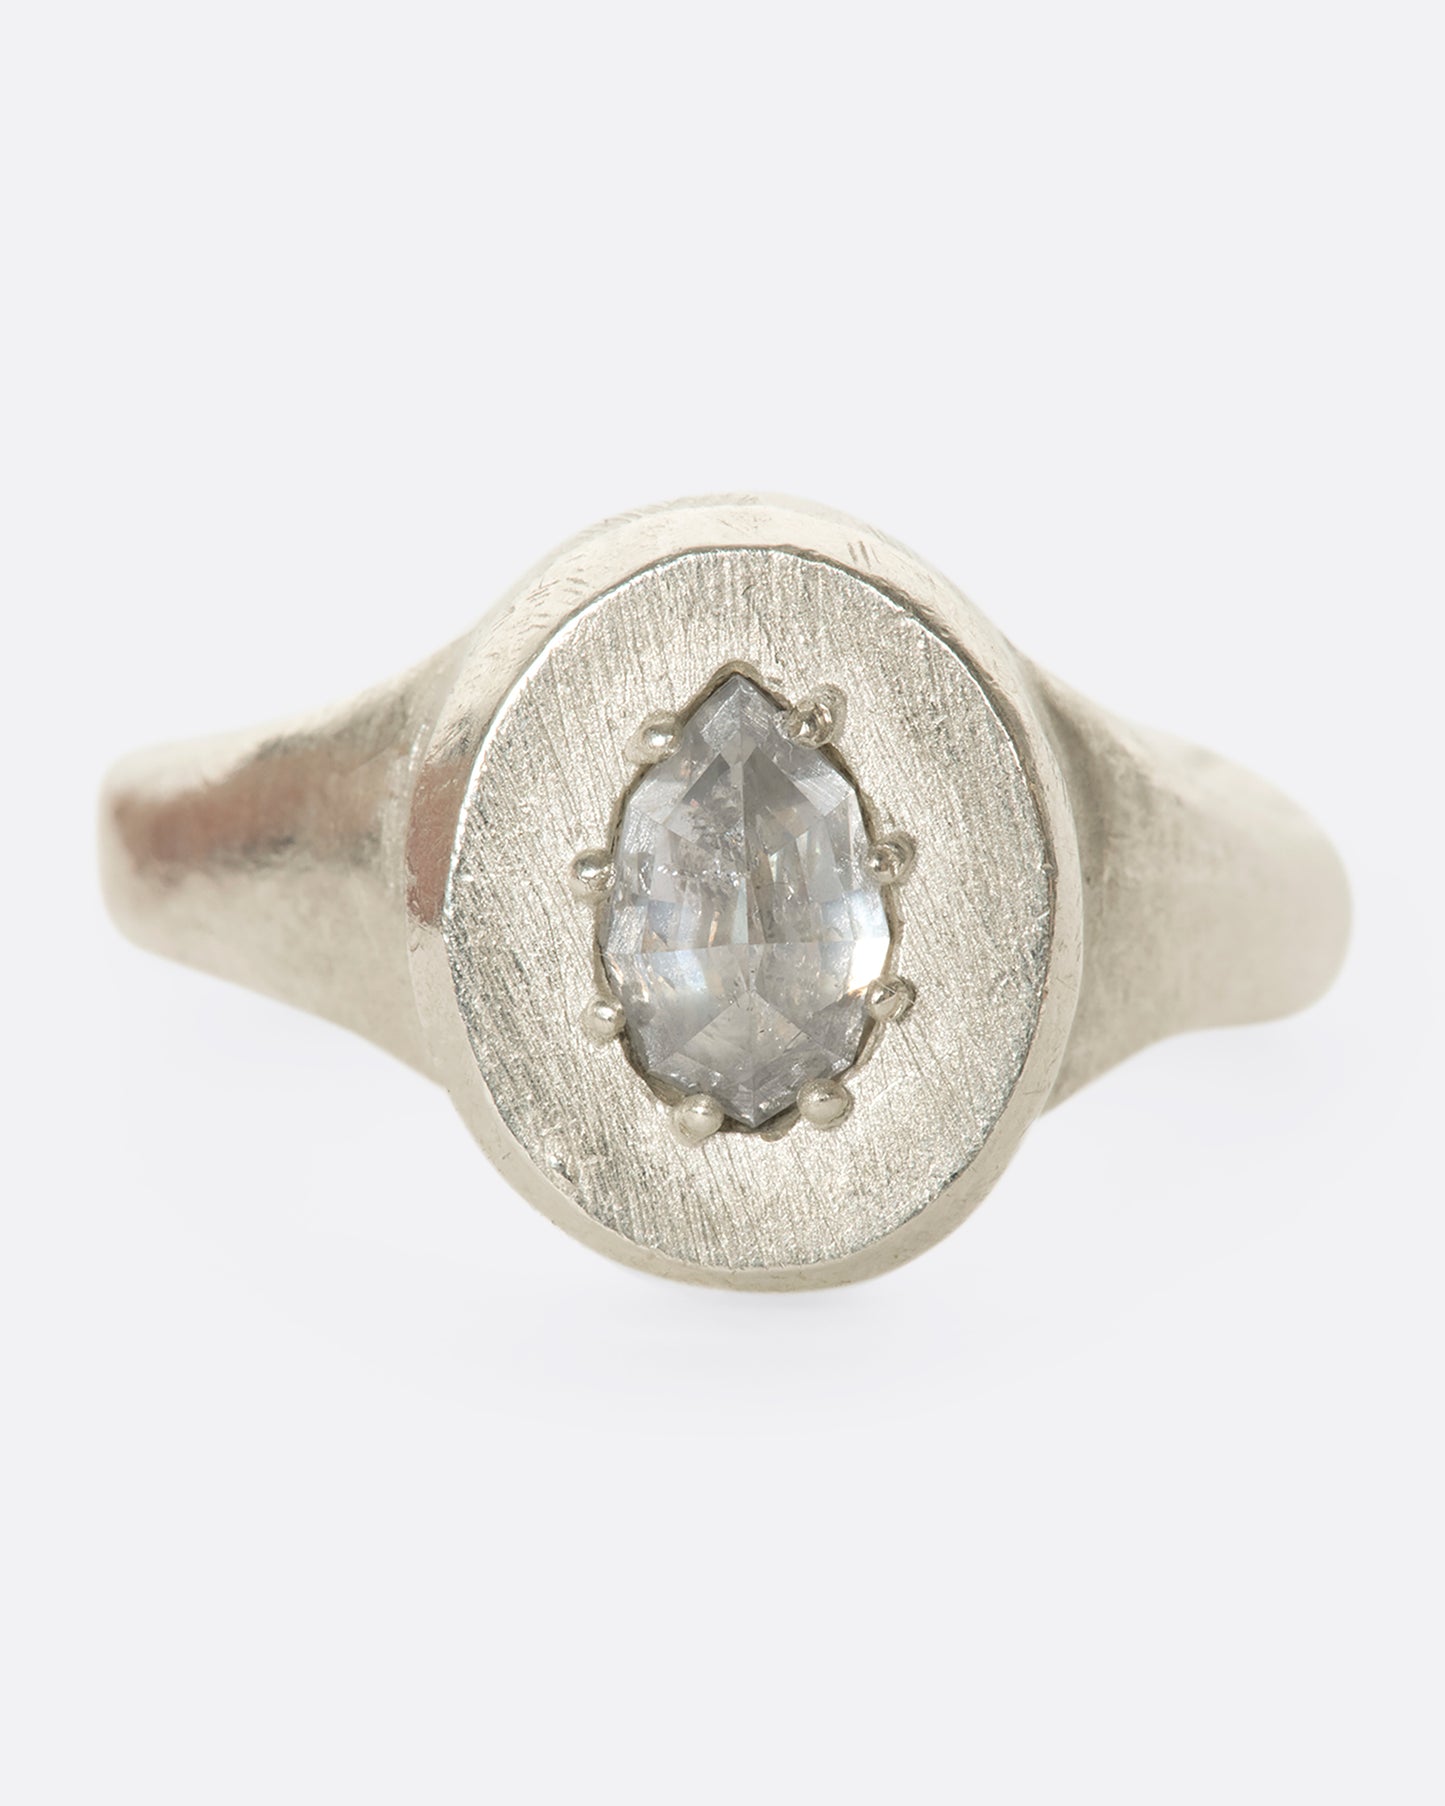 A sterling silver signet ring with a pear-shaped salt and pepper diamond secured with tiny prongs